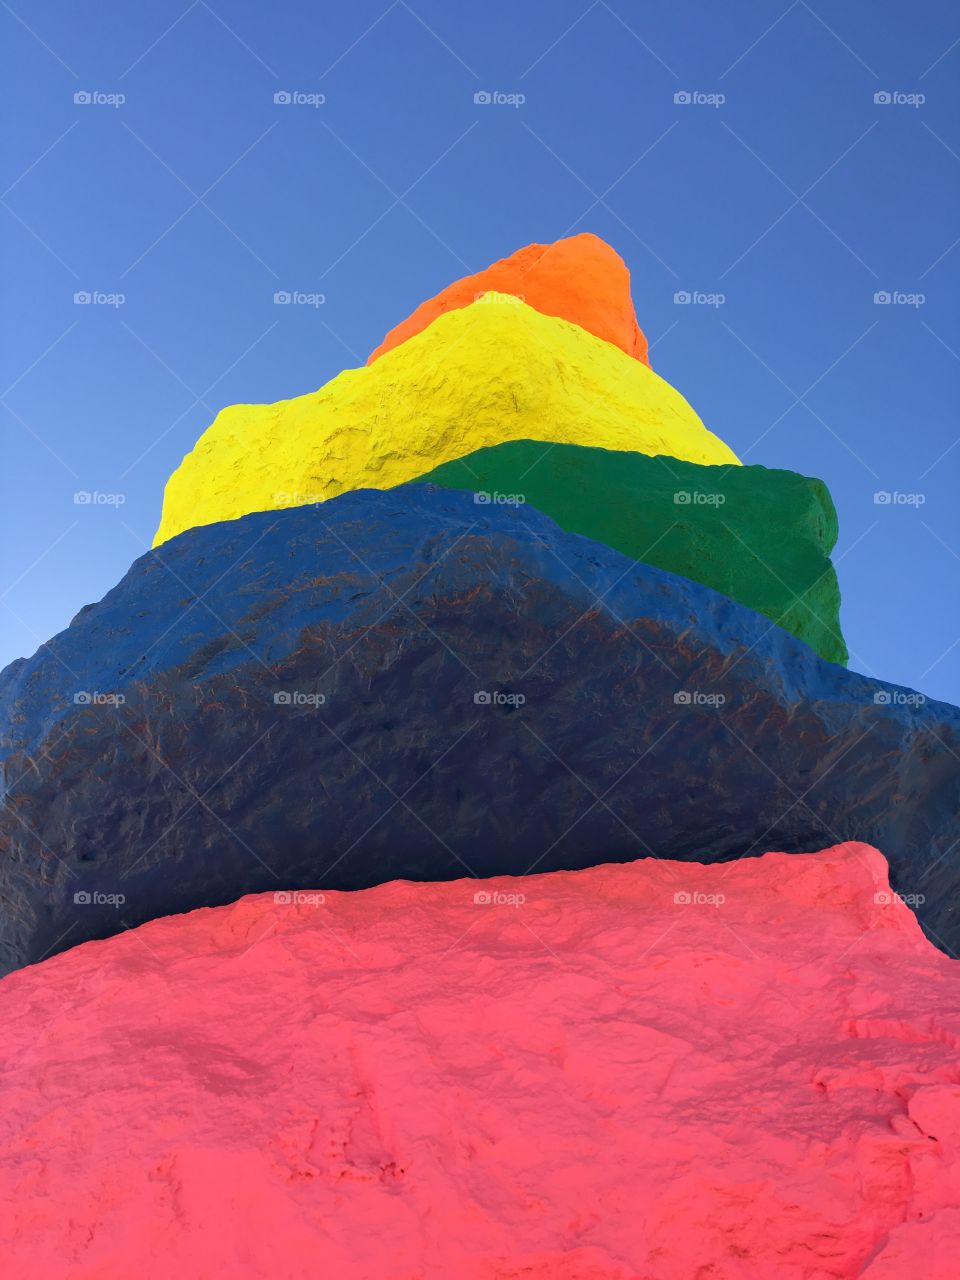 One of the mountains from the "Seven Magic Mountains" art installation